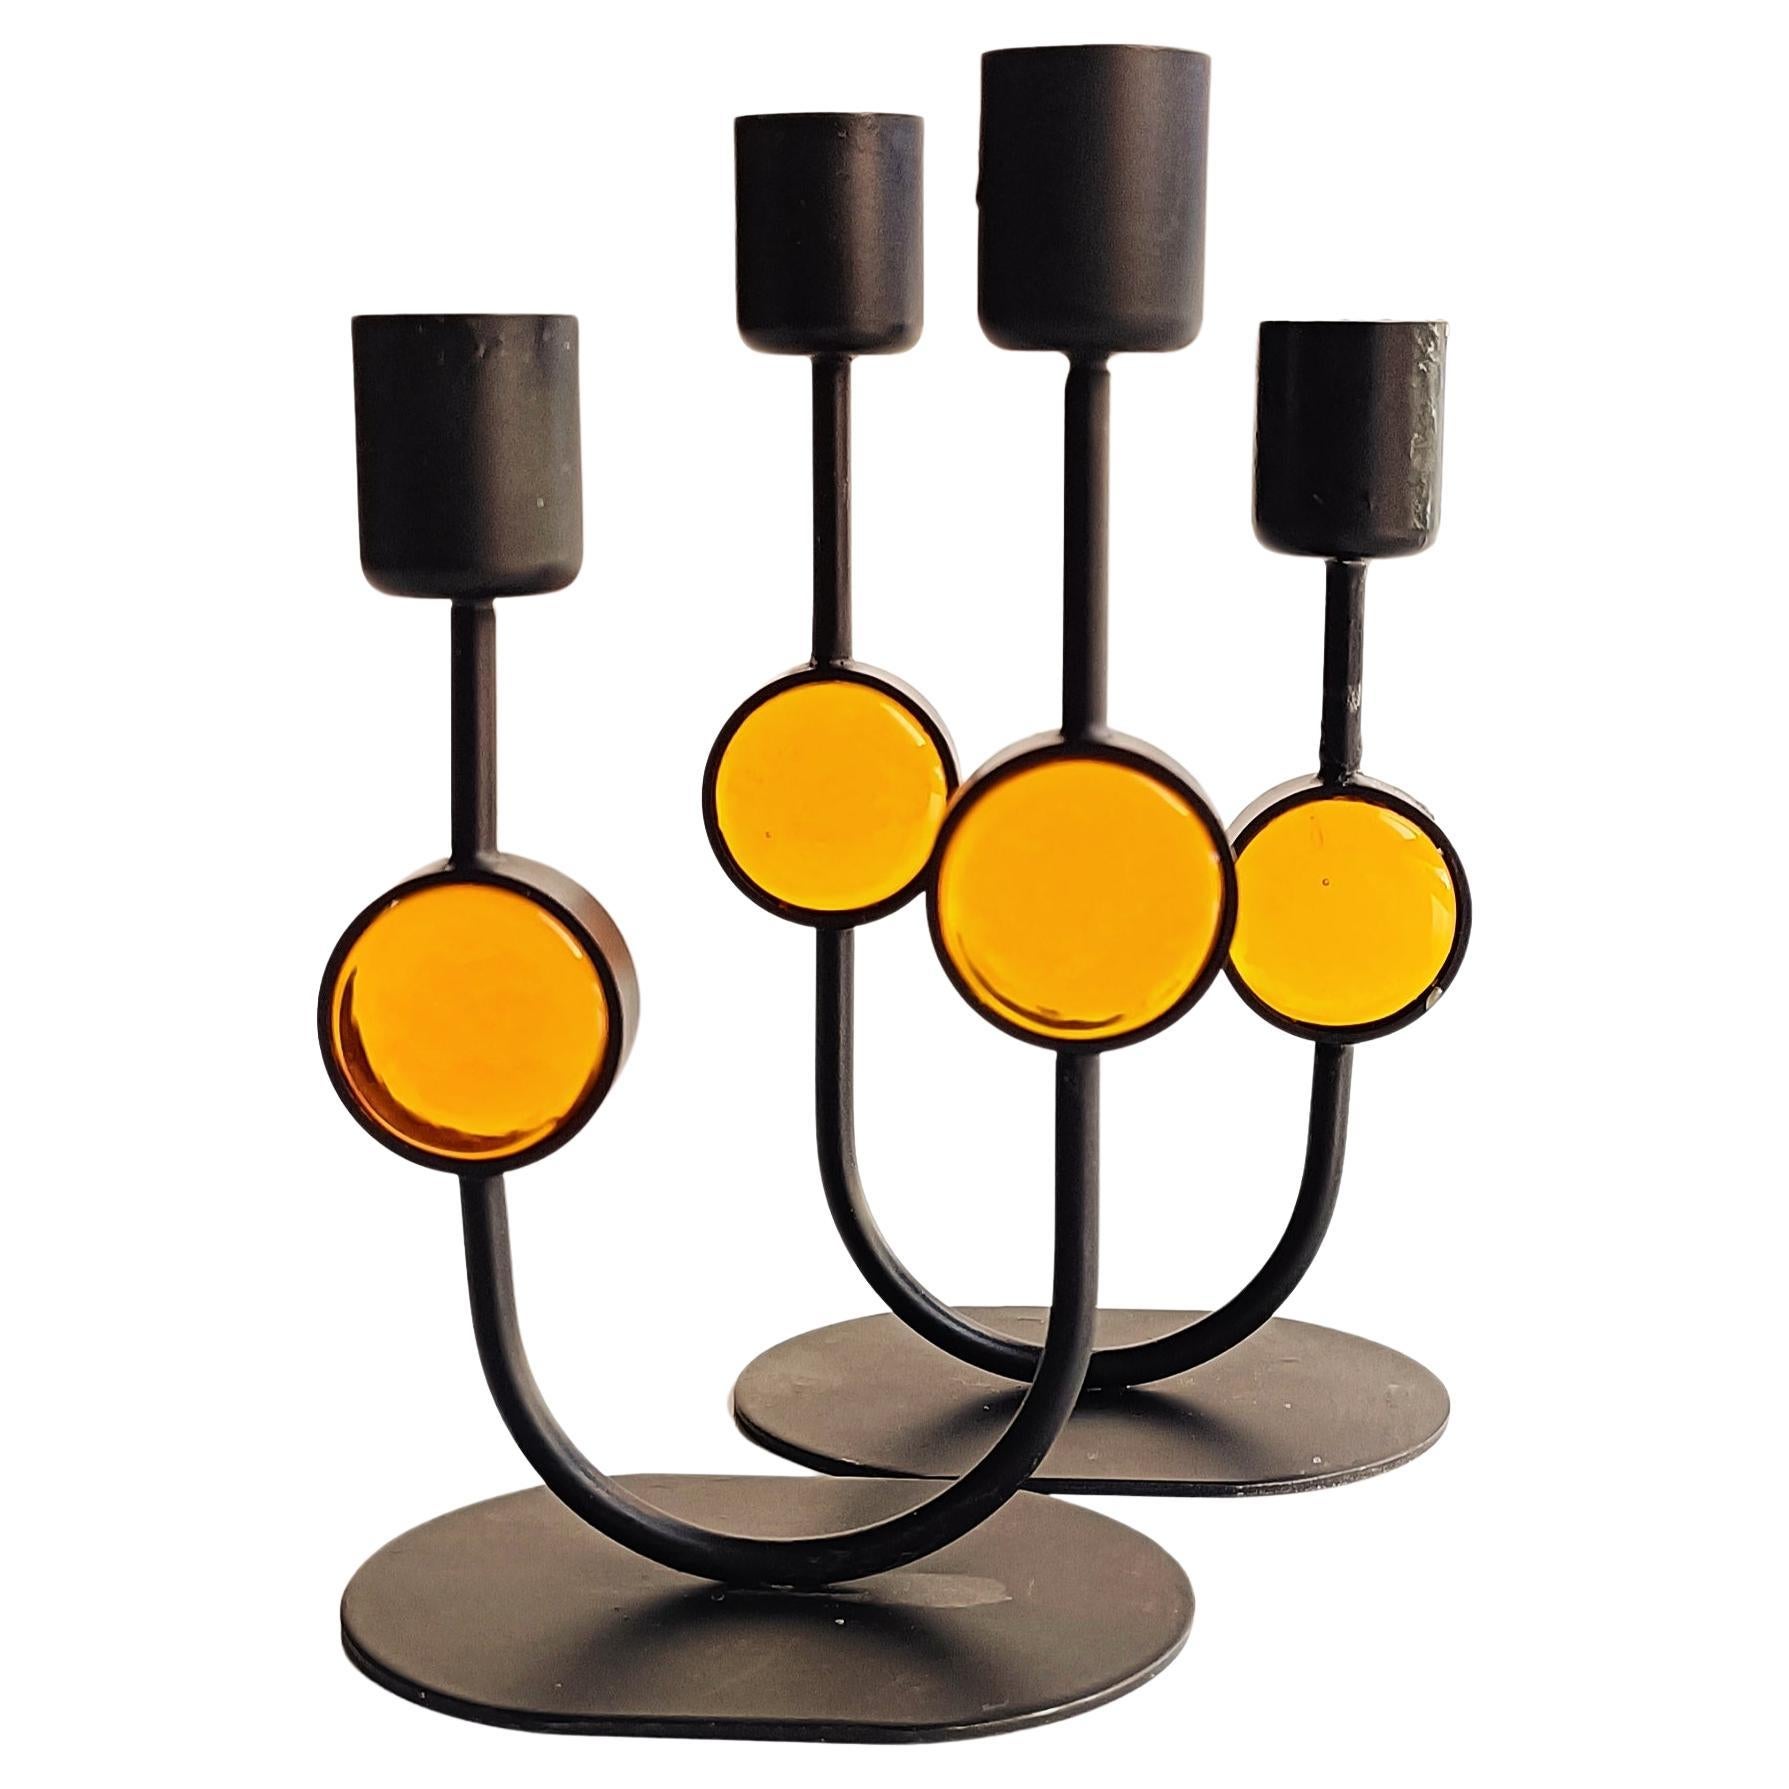 Hand-Crafted Scandinavian Modern Gunnar Under for Ystad Metal Signed Pair of Candle Holders For Sale